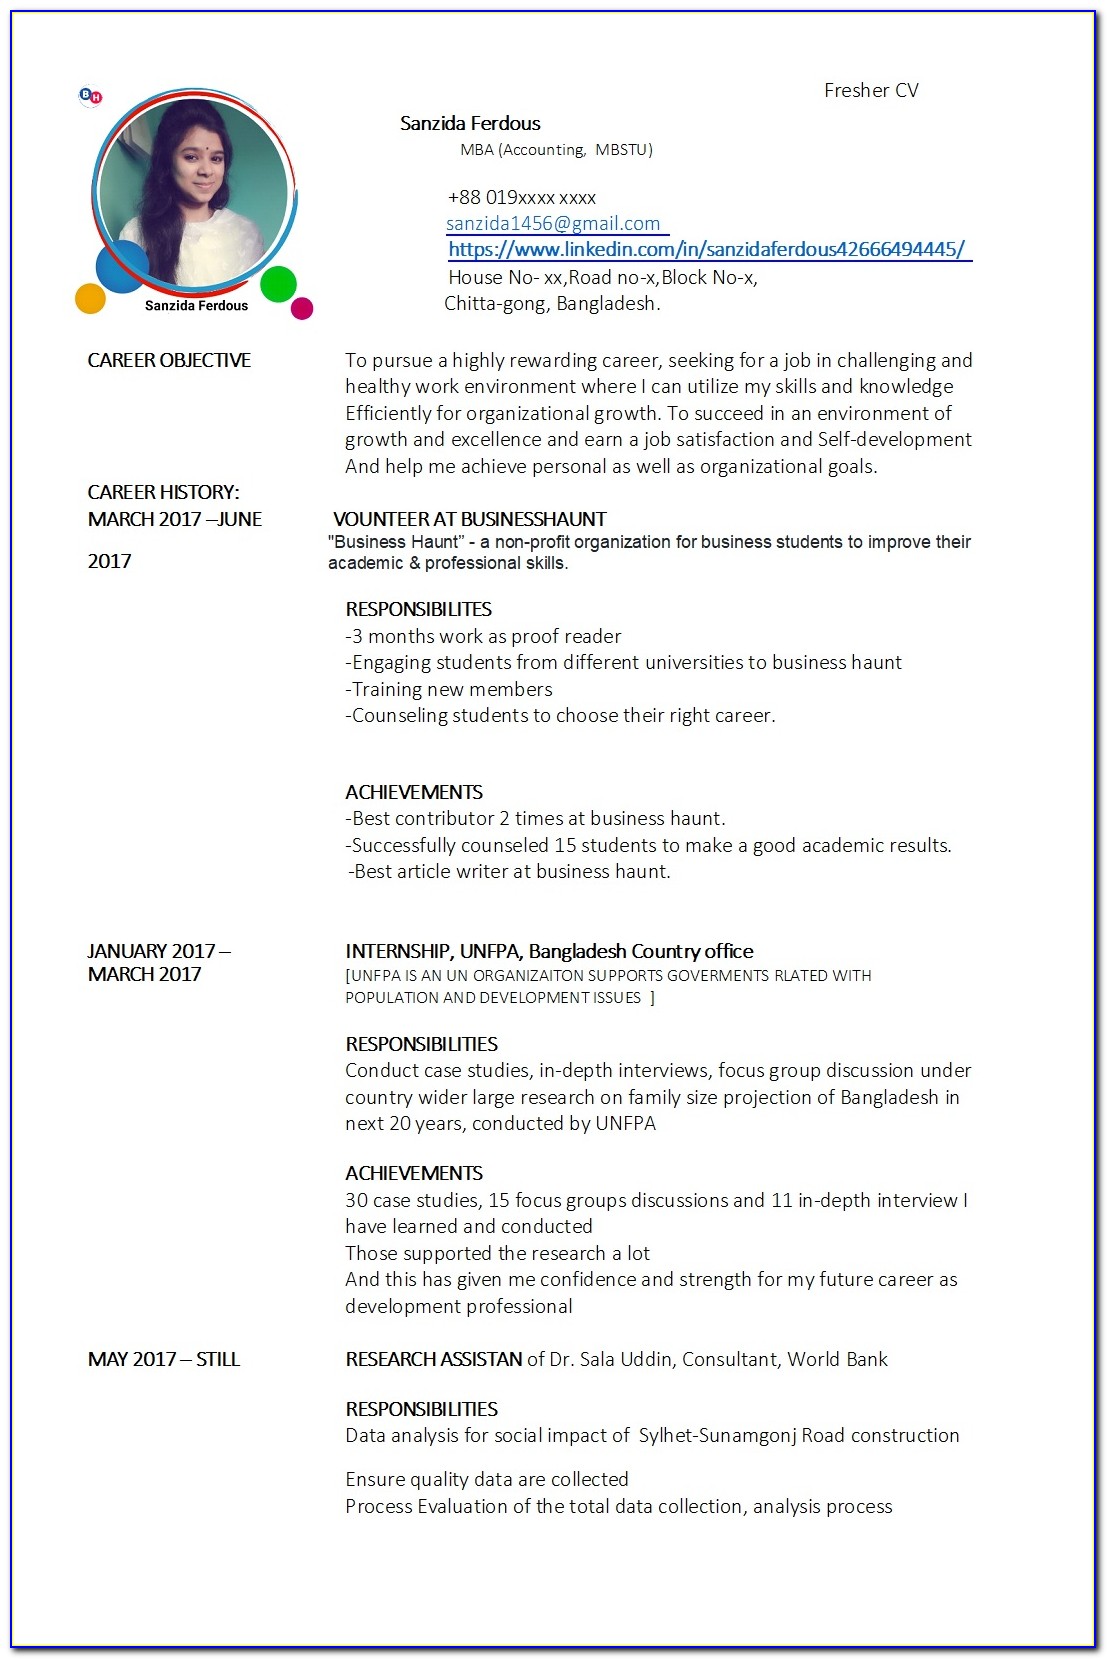 Examples Of Federal Resume Format